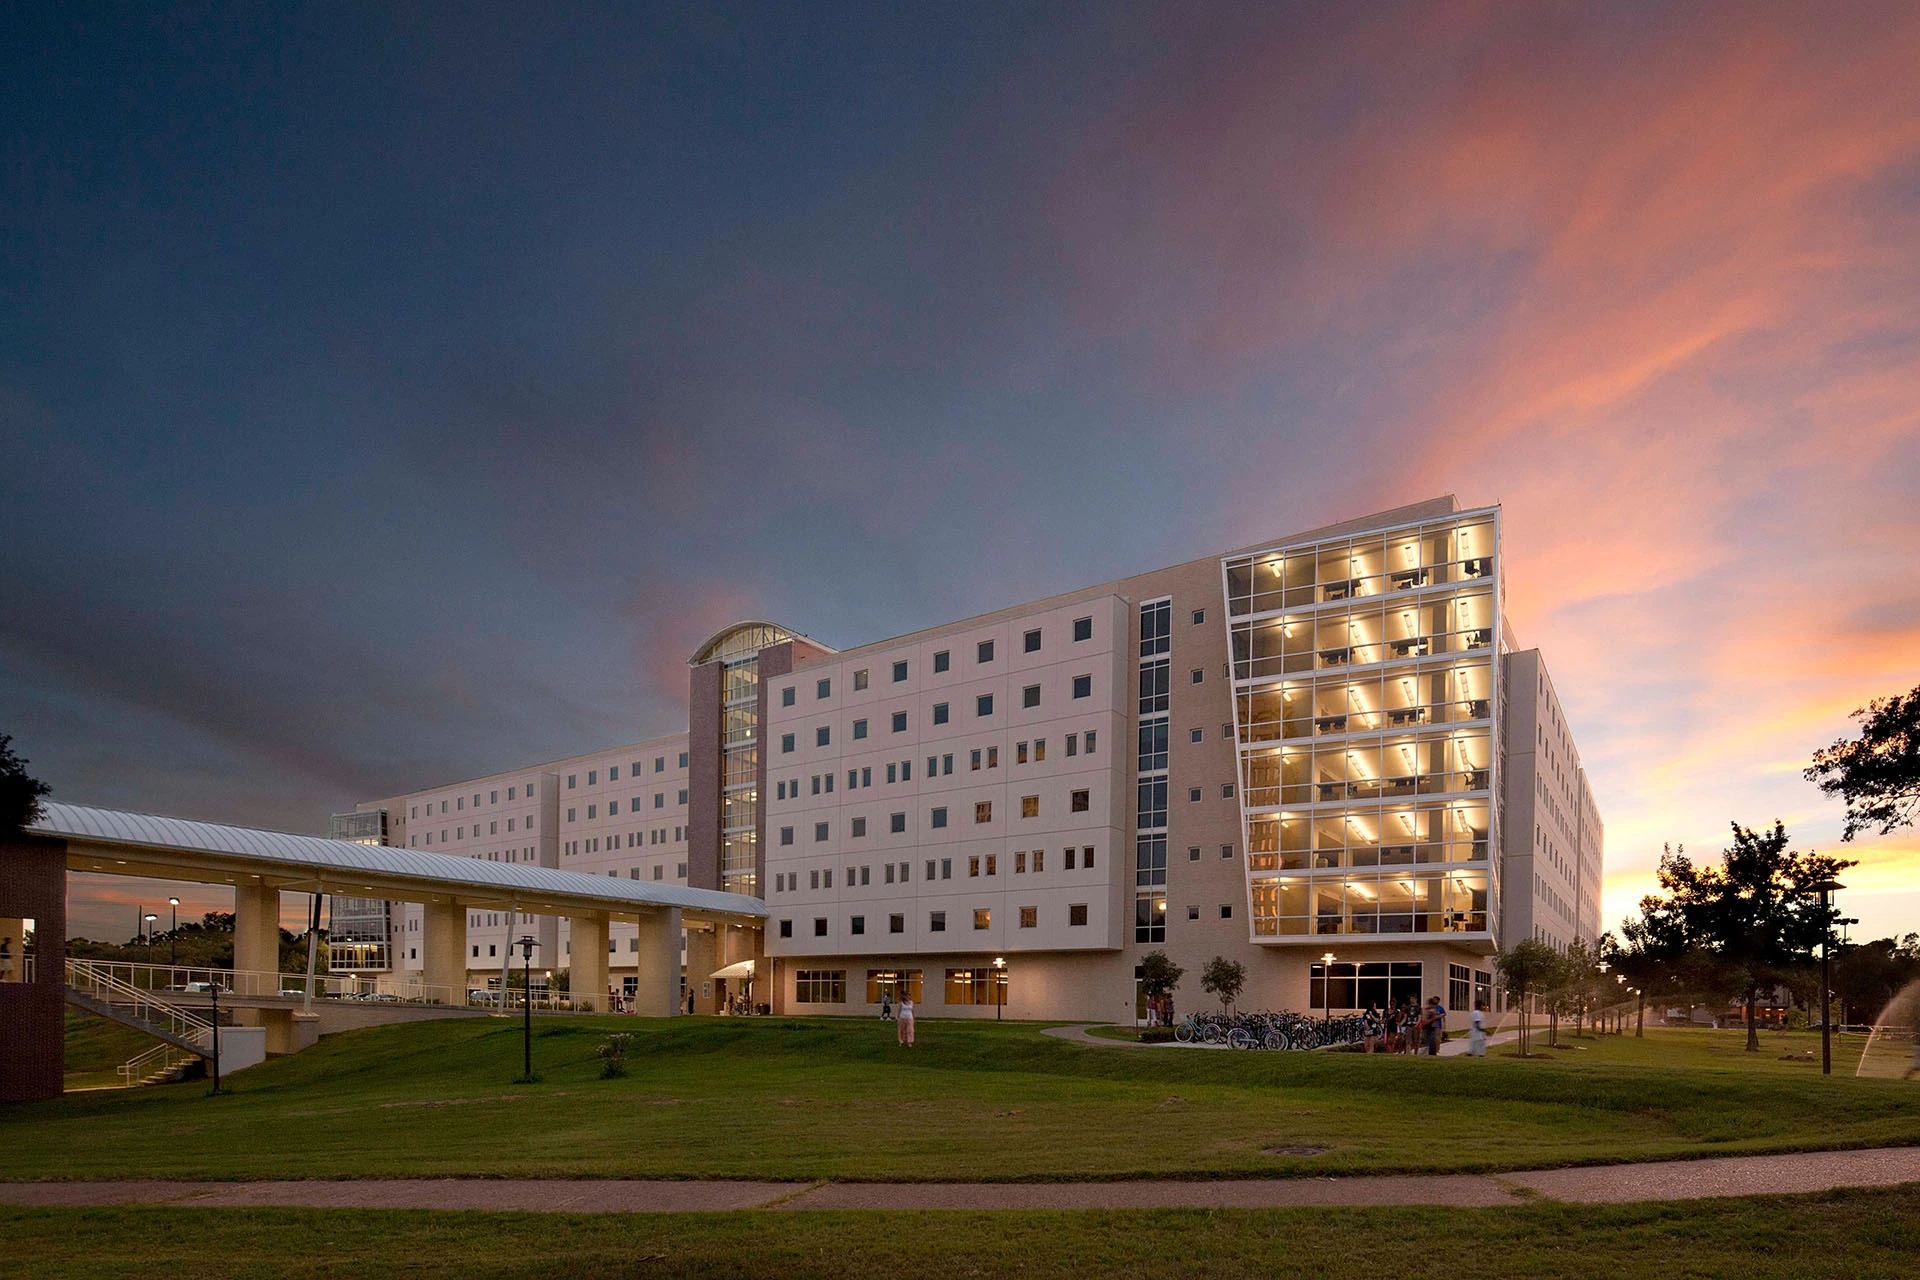 Photo of Cougar Village on the University of Houston campus.